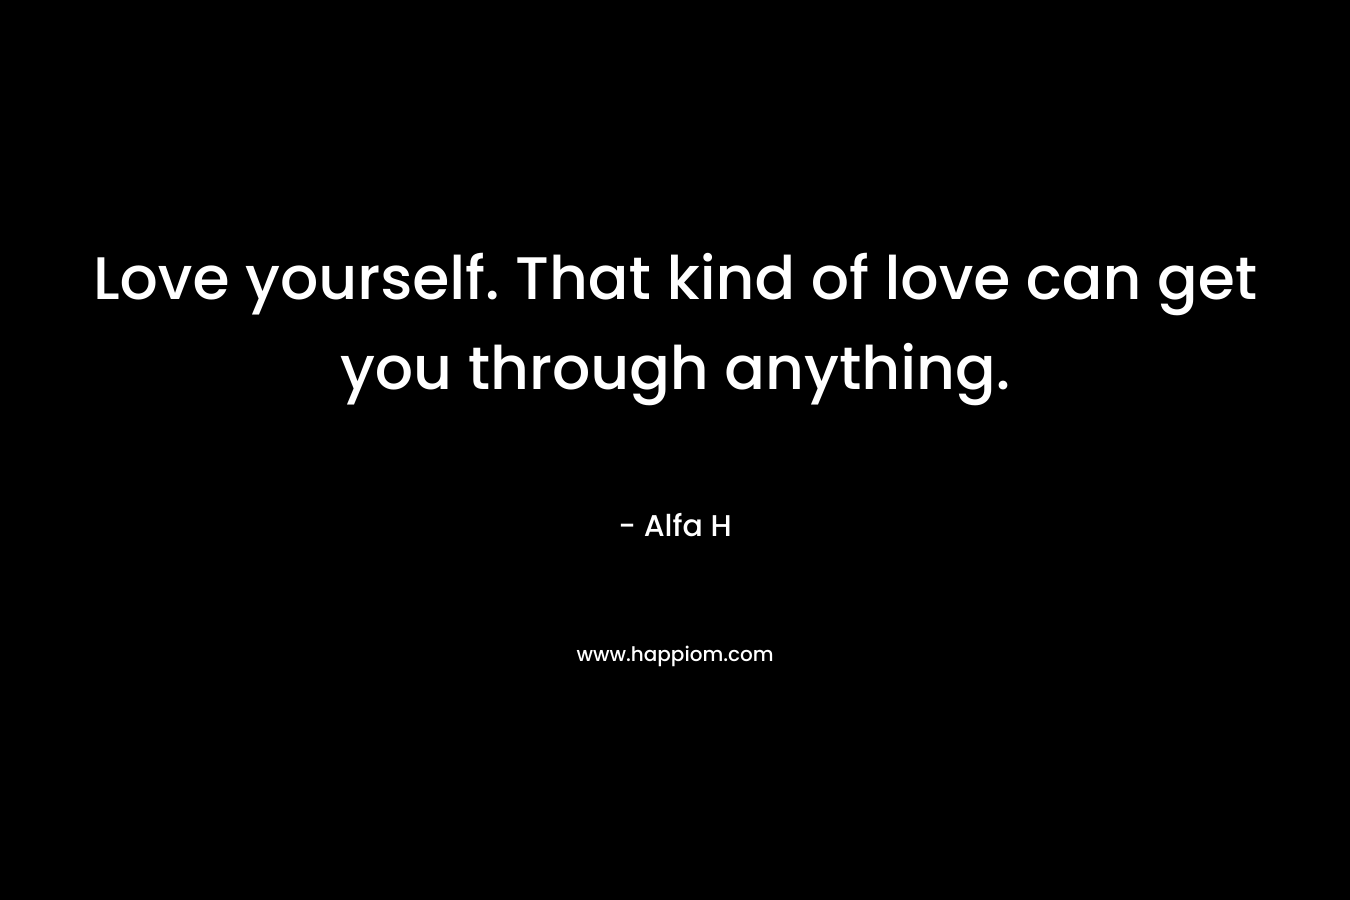 Love yourself. That kind of love can get you through anything.